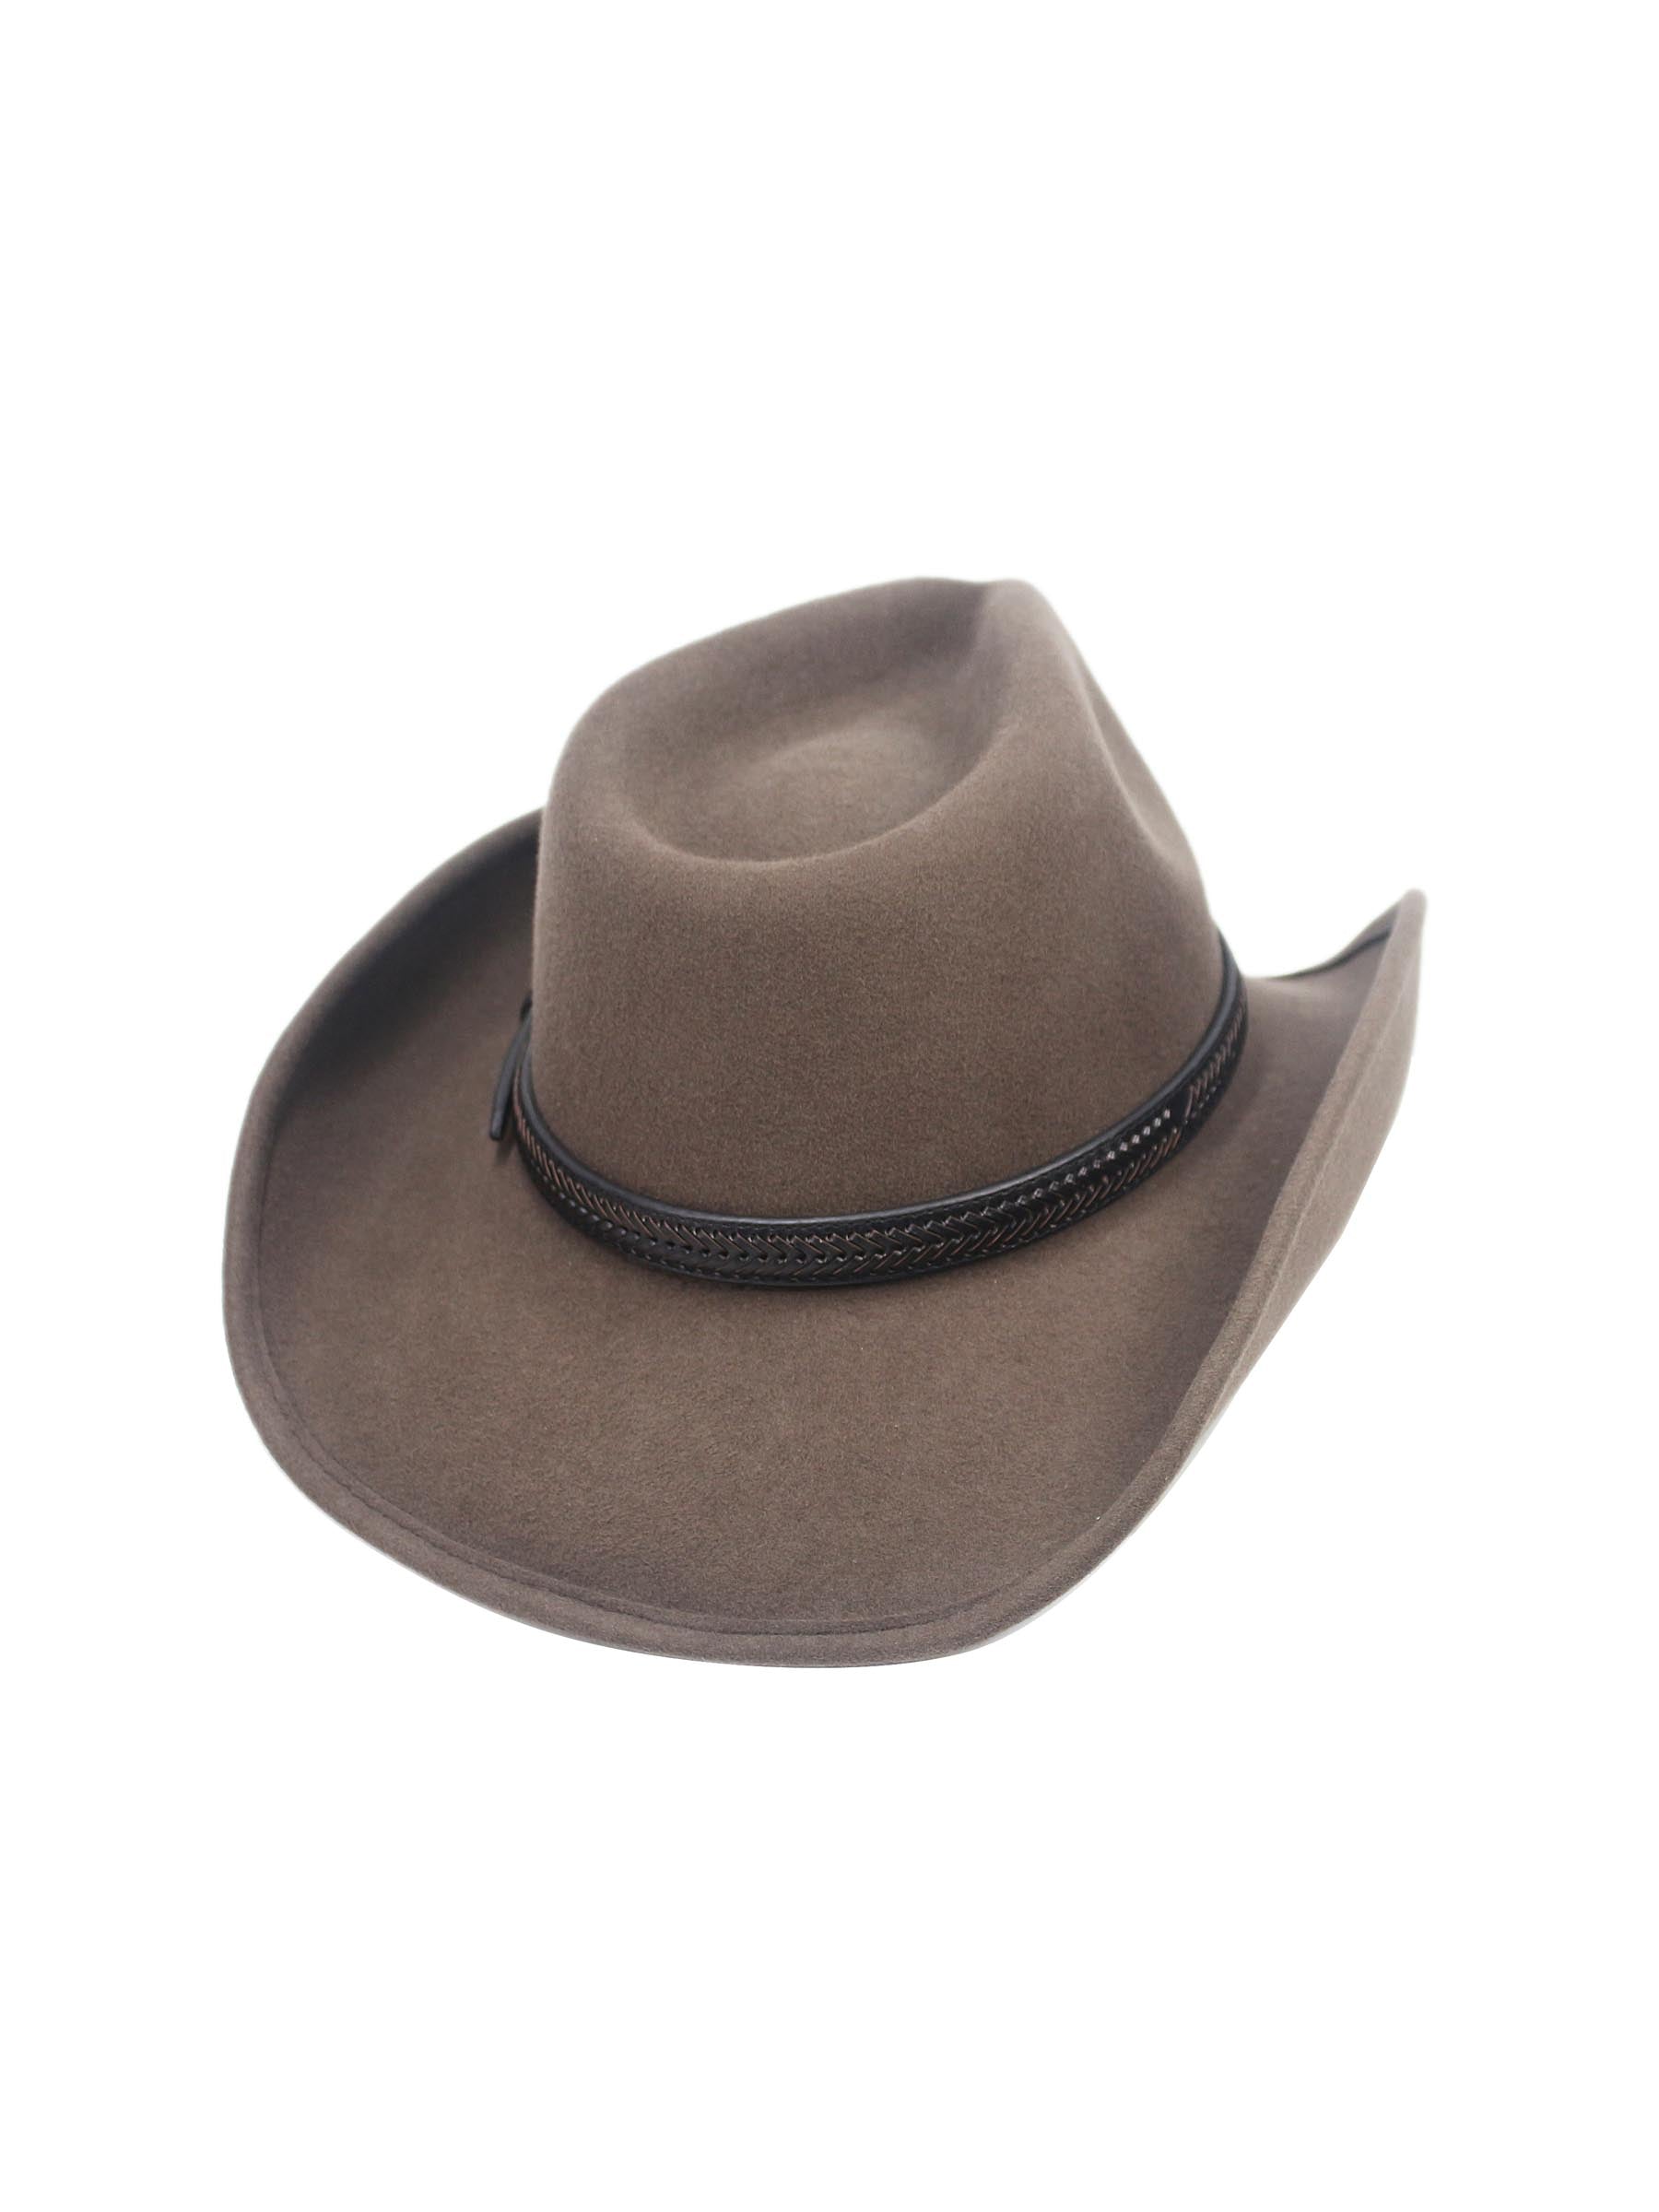 Western Hat Band for Cowboy Hats by Silver Canyon, Vegan Leather with –  Silver Canyon Boot and Clothing Company